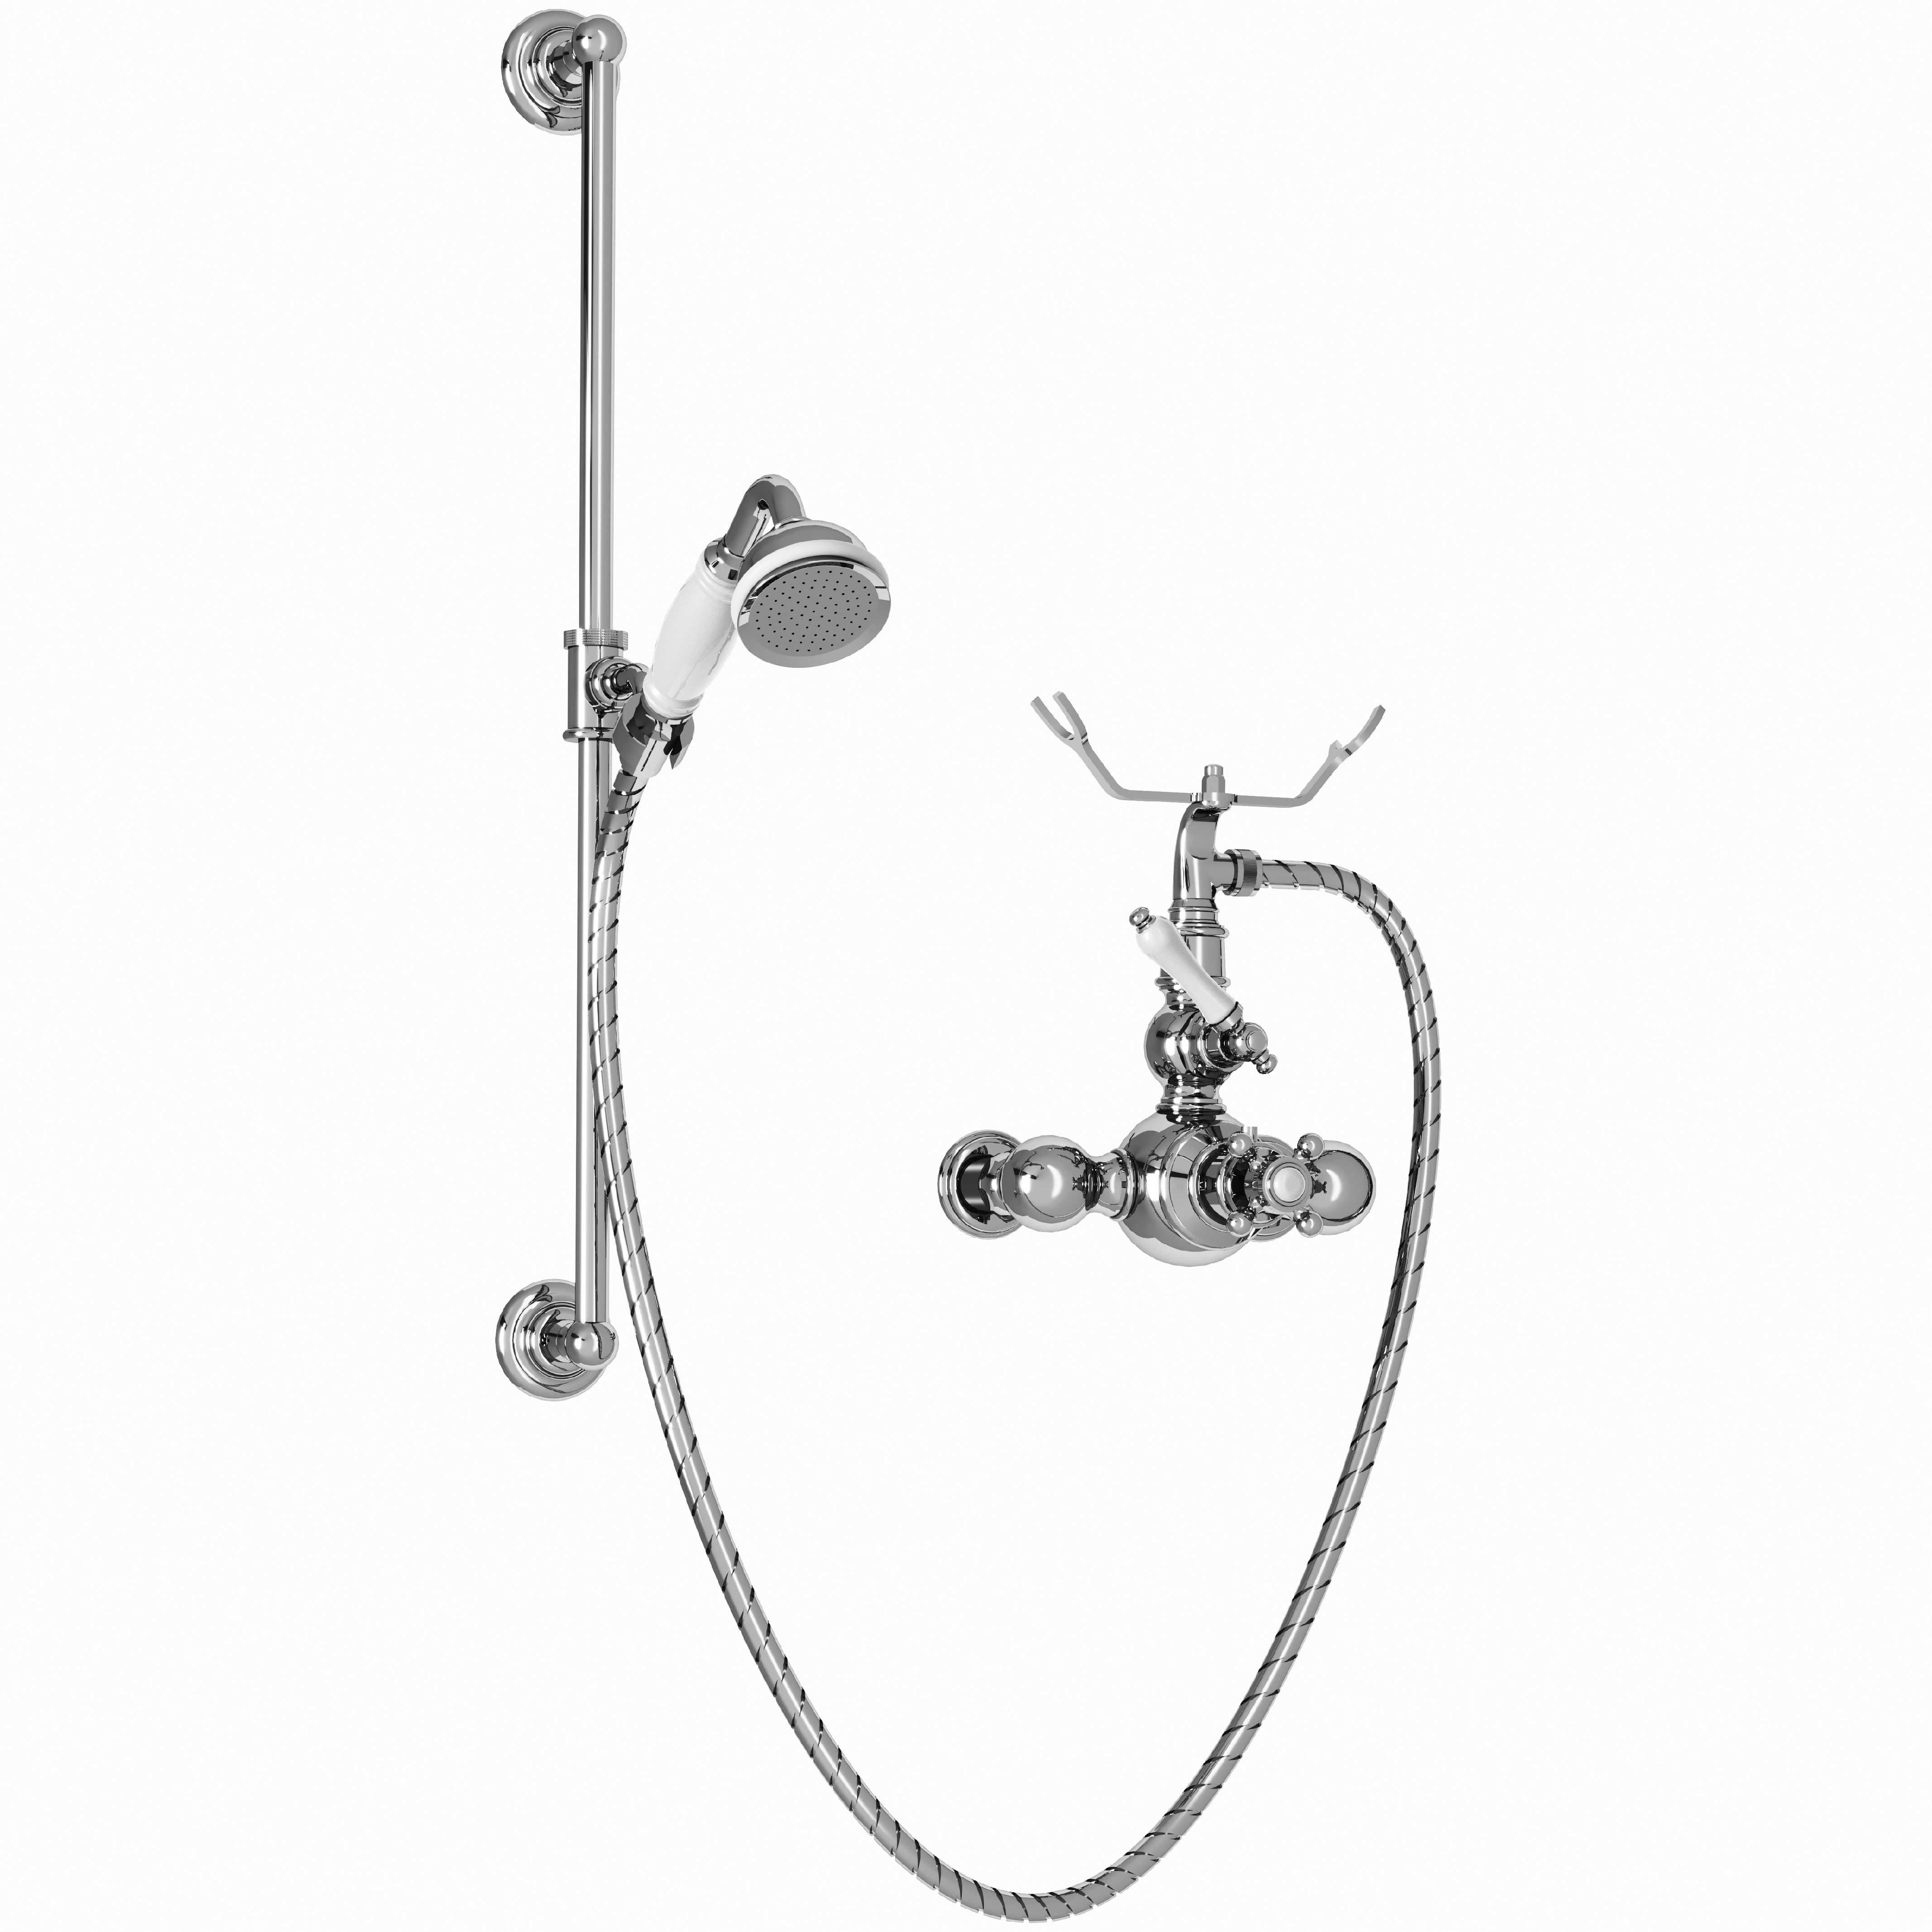 M04-2202T Thermo. shower mixer with sliding bar